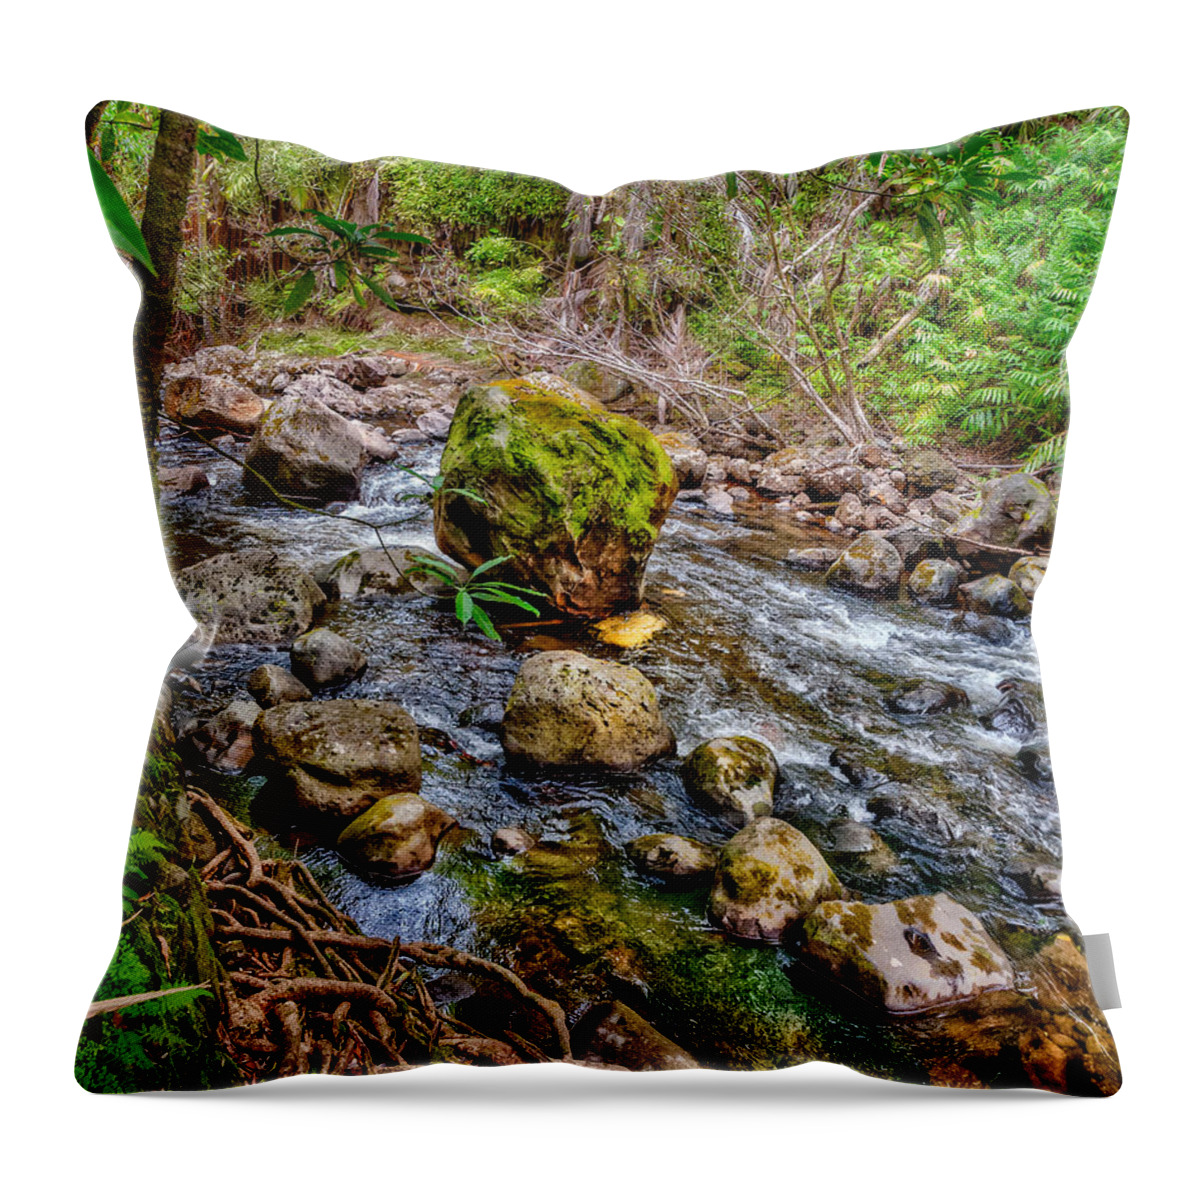 Rocks Throw Pillow featuring the photograph Mossy Boulder by Christopher Holmes